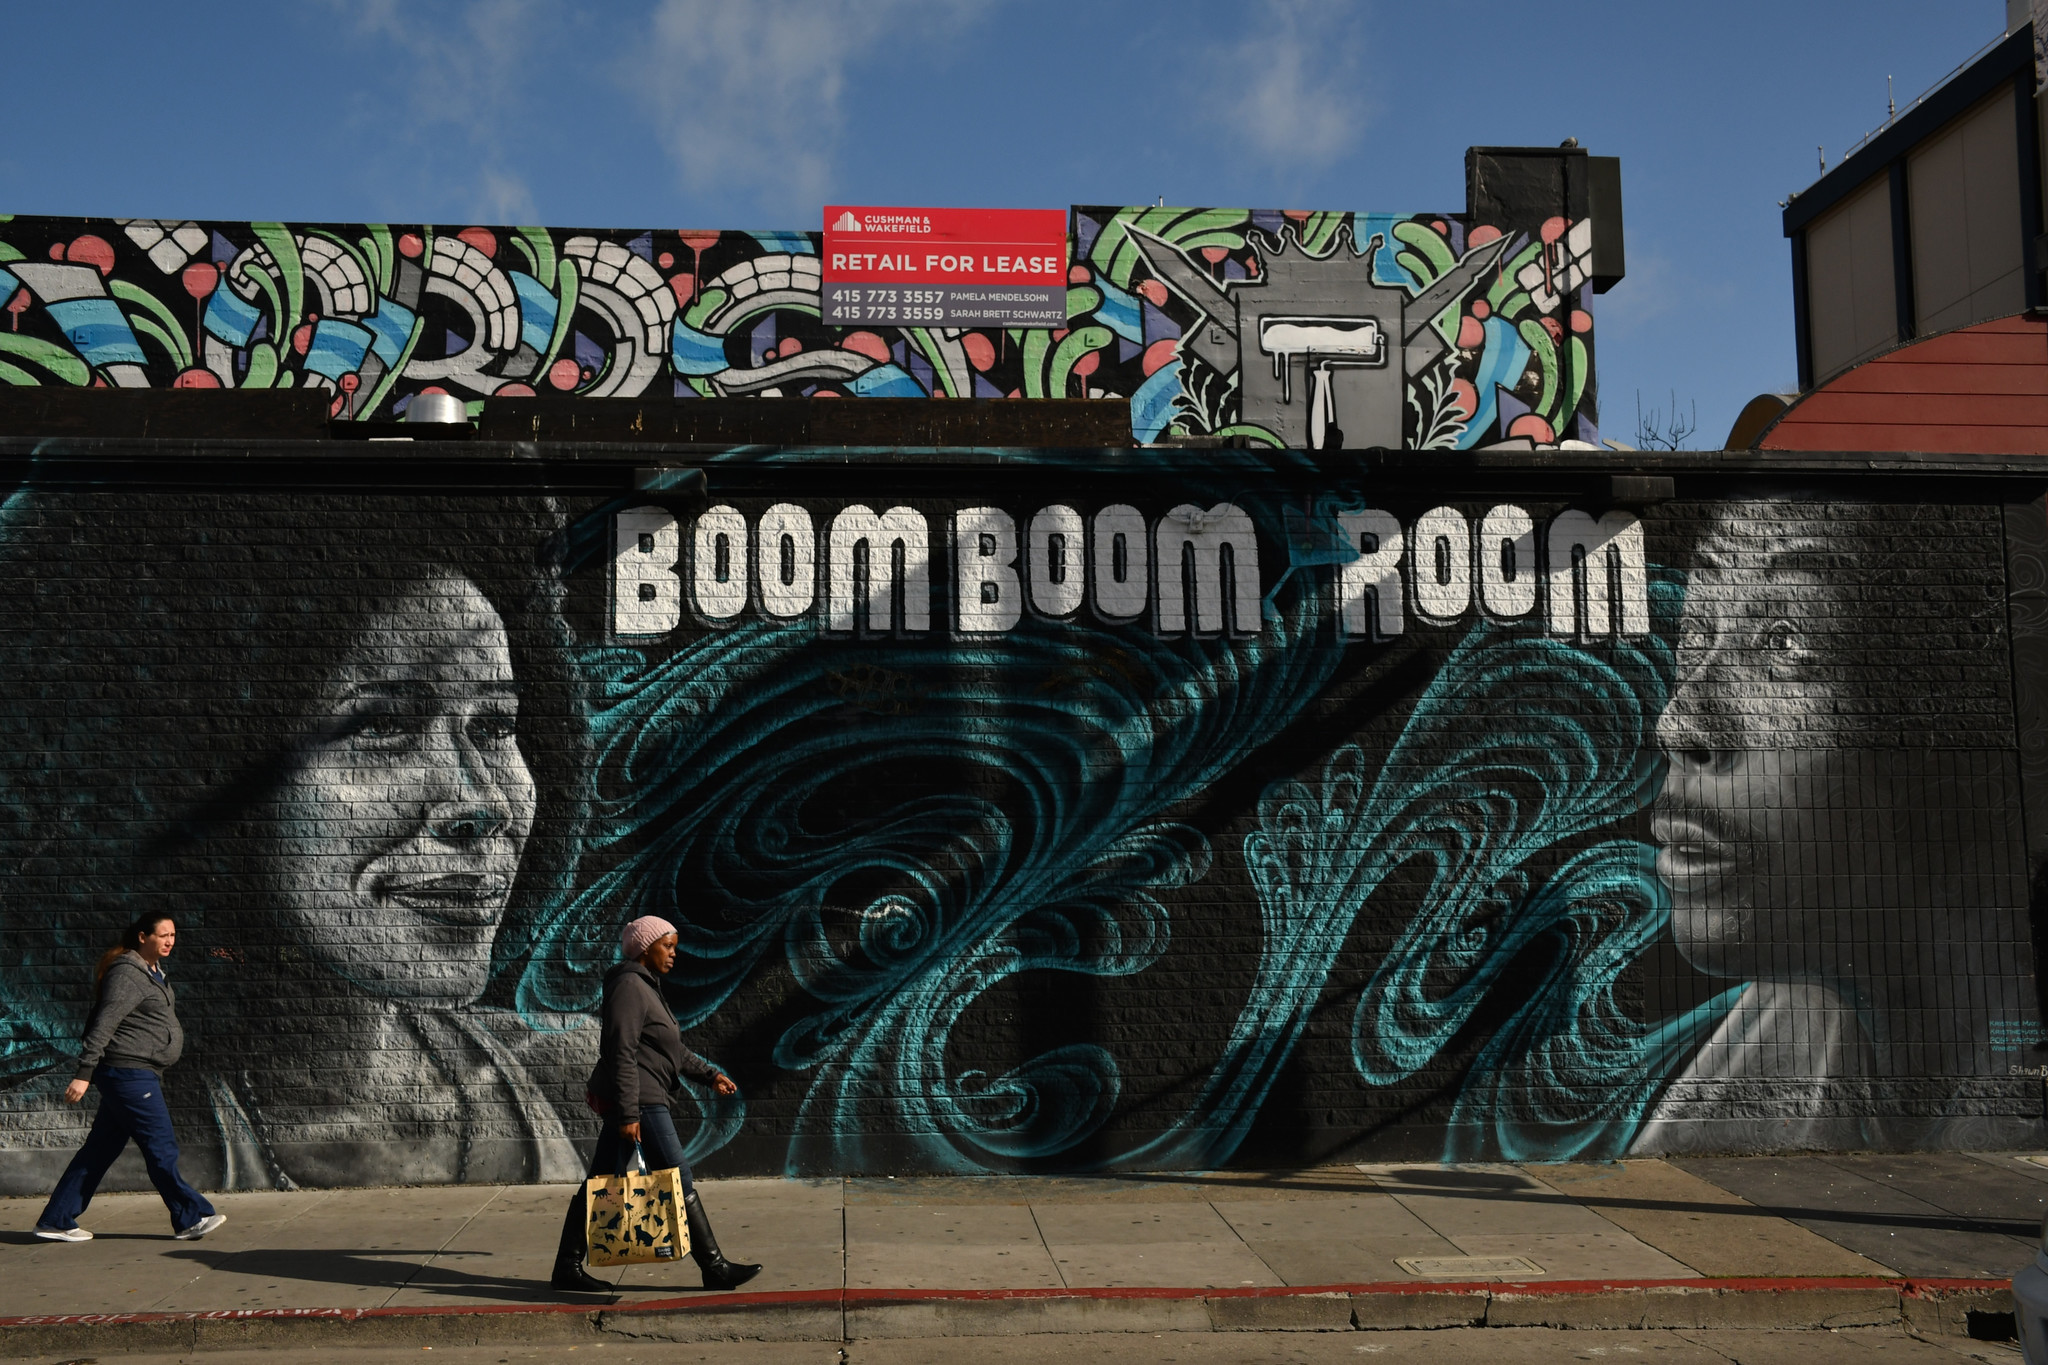 The Boom Boom Room is a lounge and music venue at Fillmore Street and Geary Boulevard in San Francisc